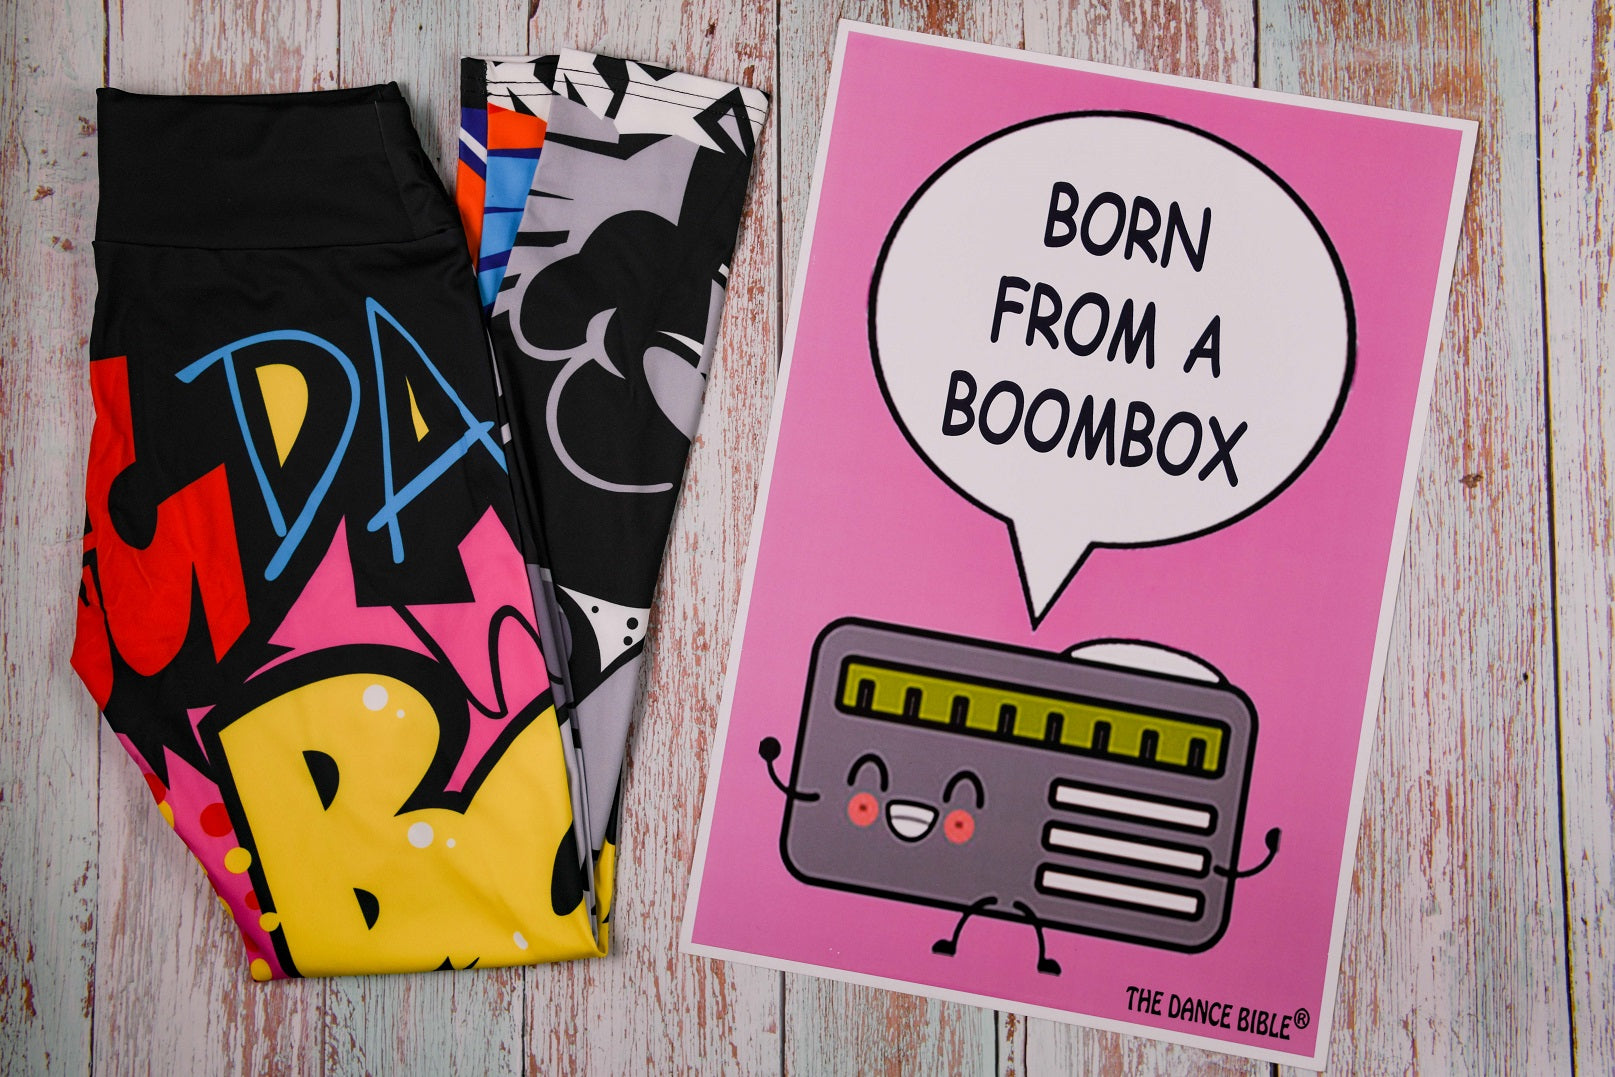 Born From a Boombox Mini Skirts Print Poster